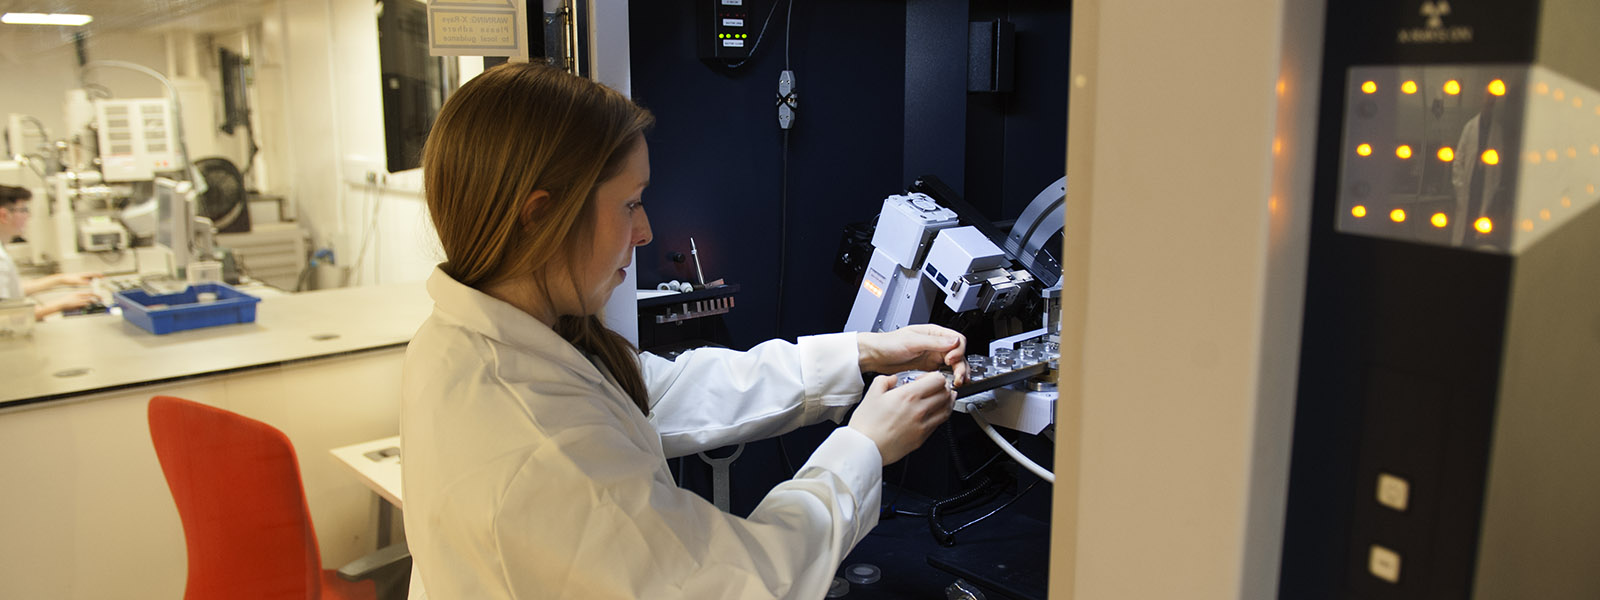 Researcher carries out diffraction analysis.